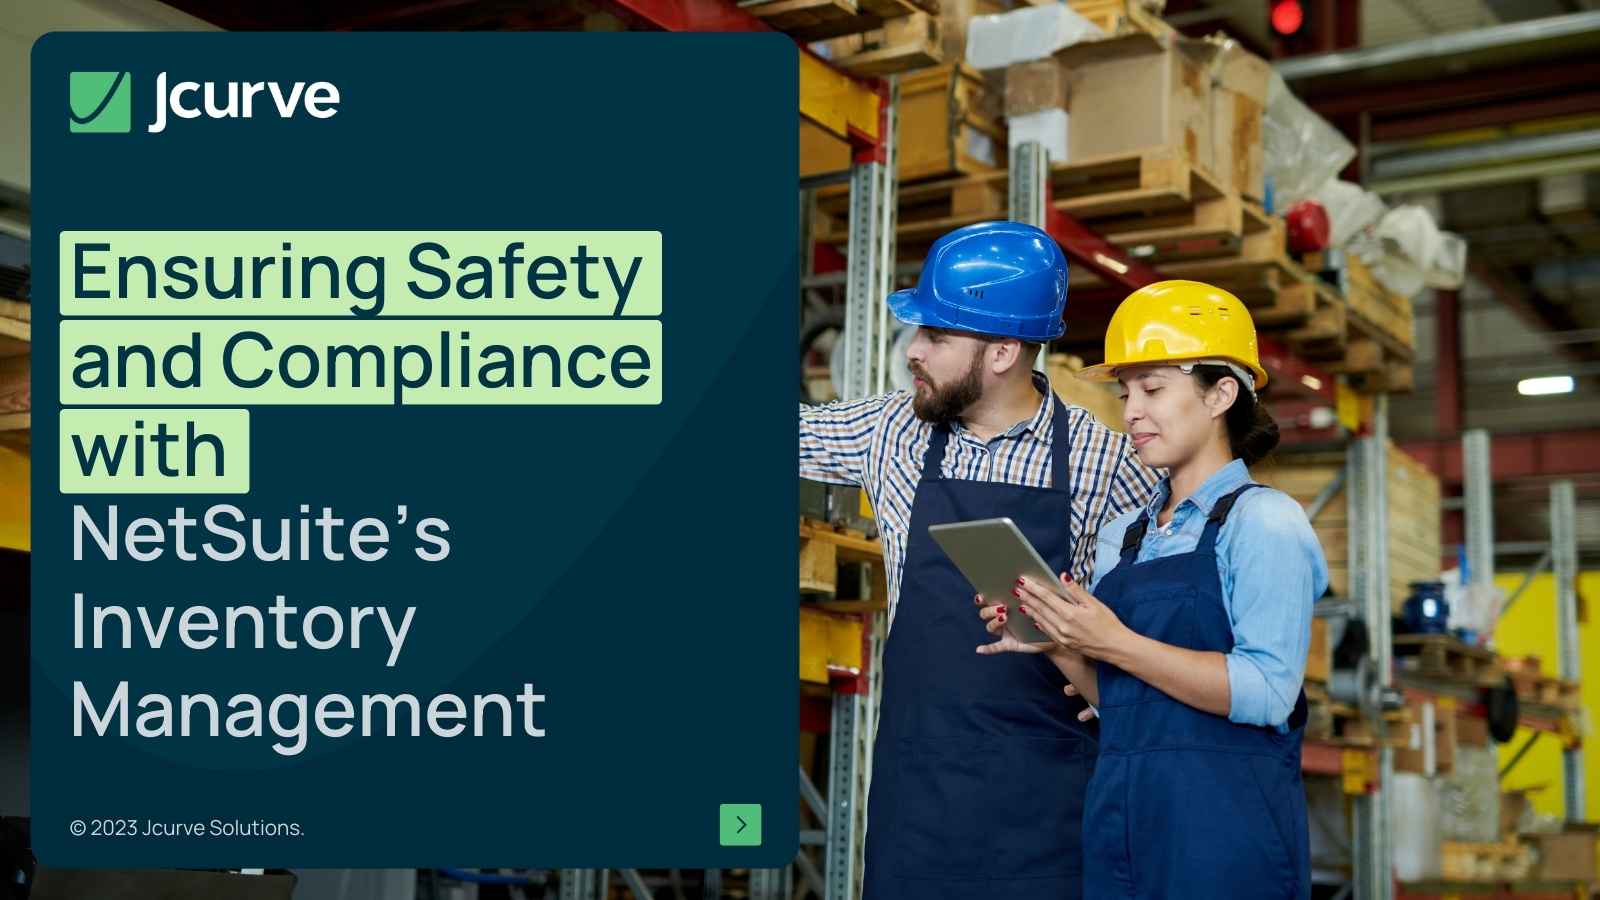 Ensuring Safety and Compliance with NetSuite’s Inventory Management